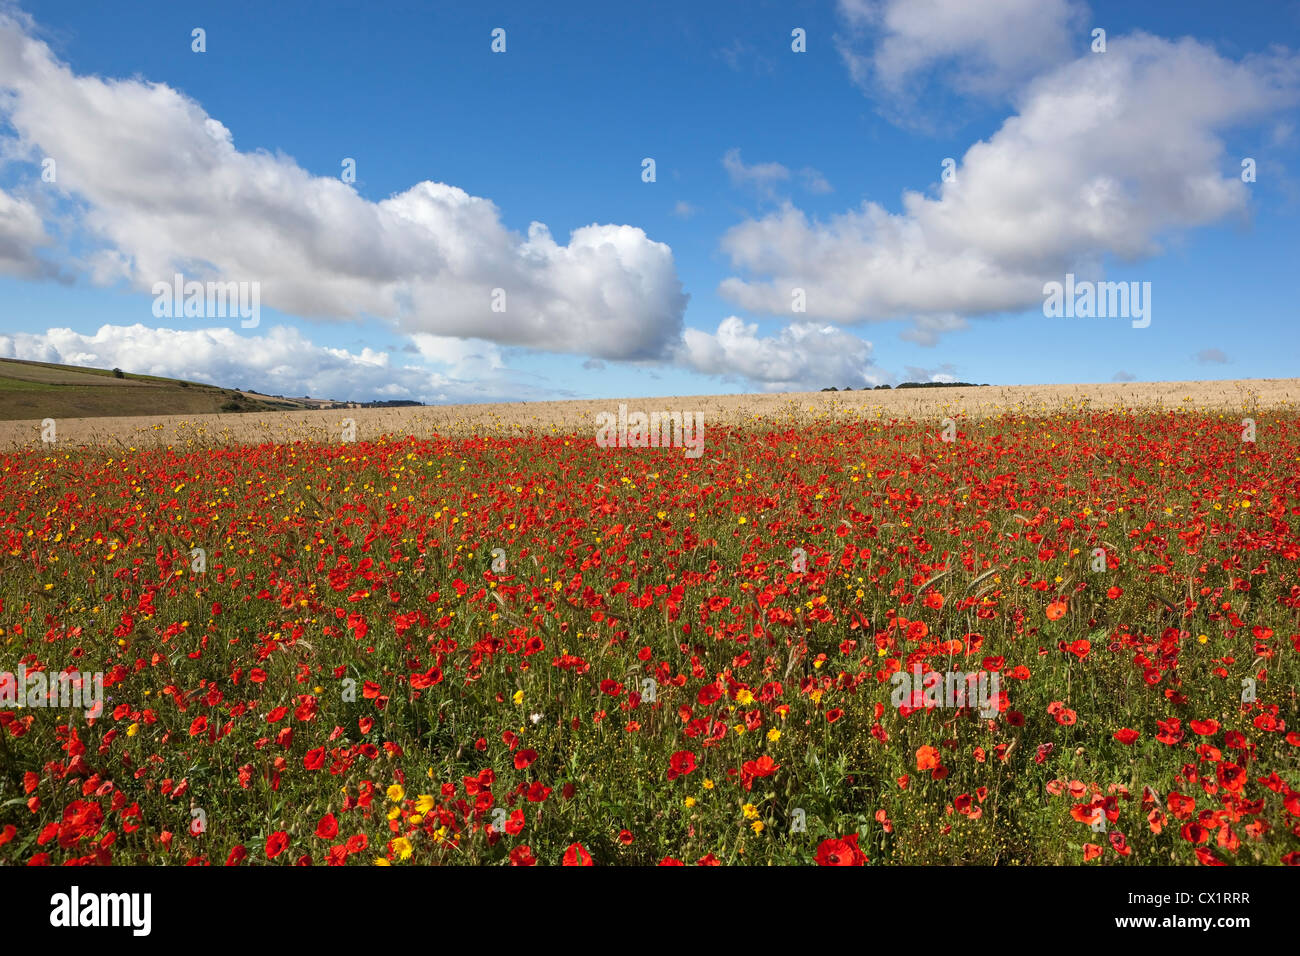 Bright red Poppies flowering profusely under a bright blue sky with dramatic wind driven clouds Stock Photo